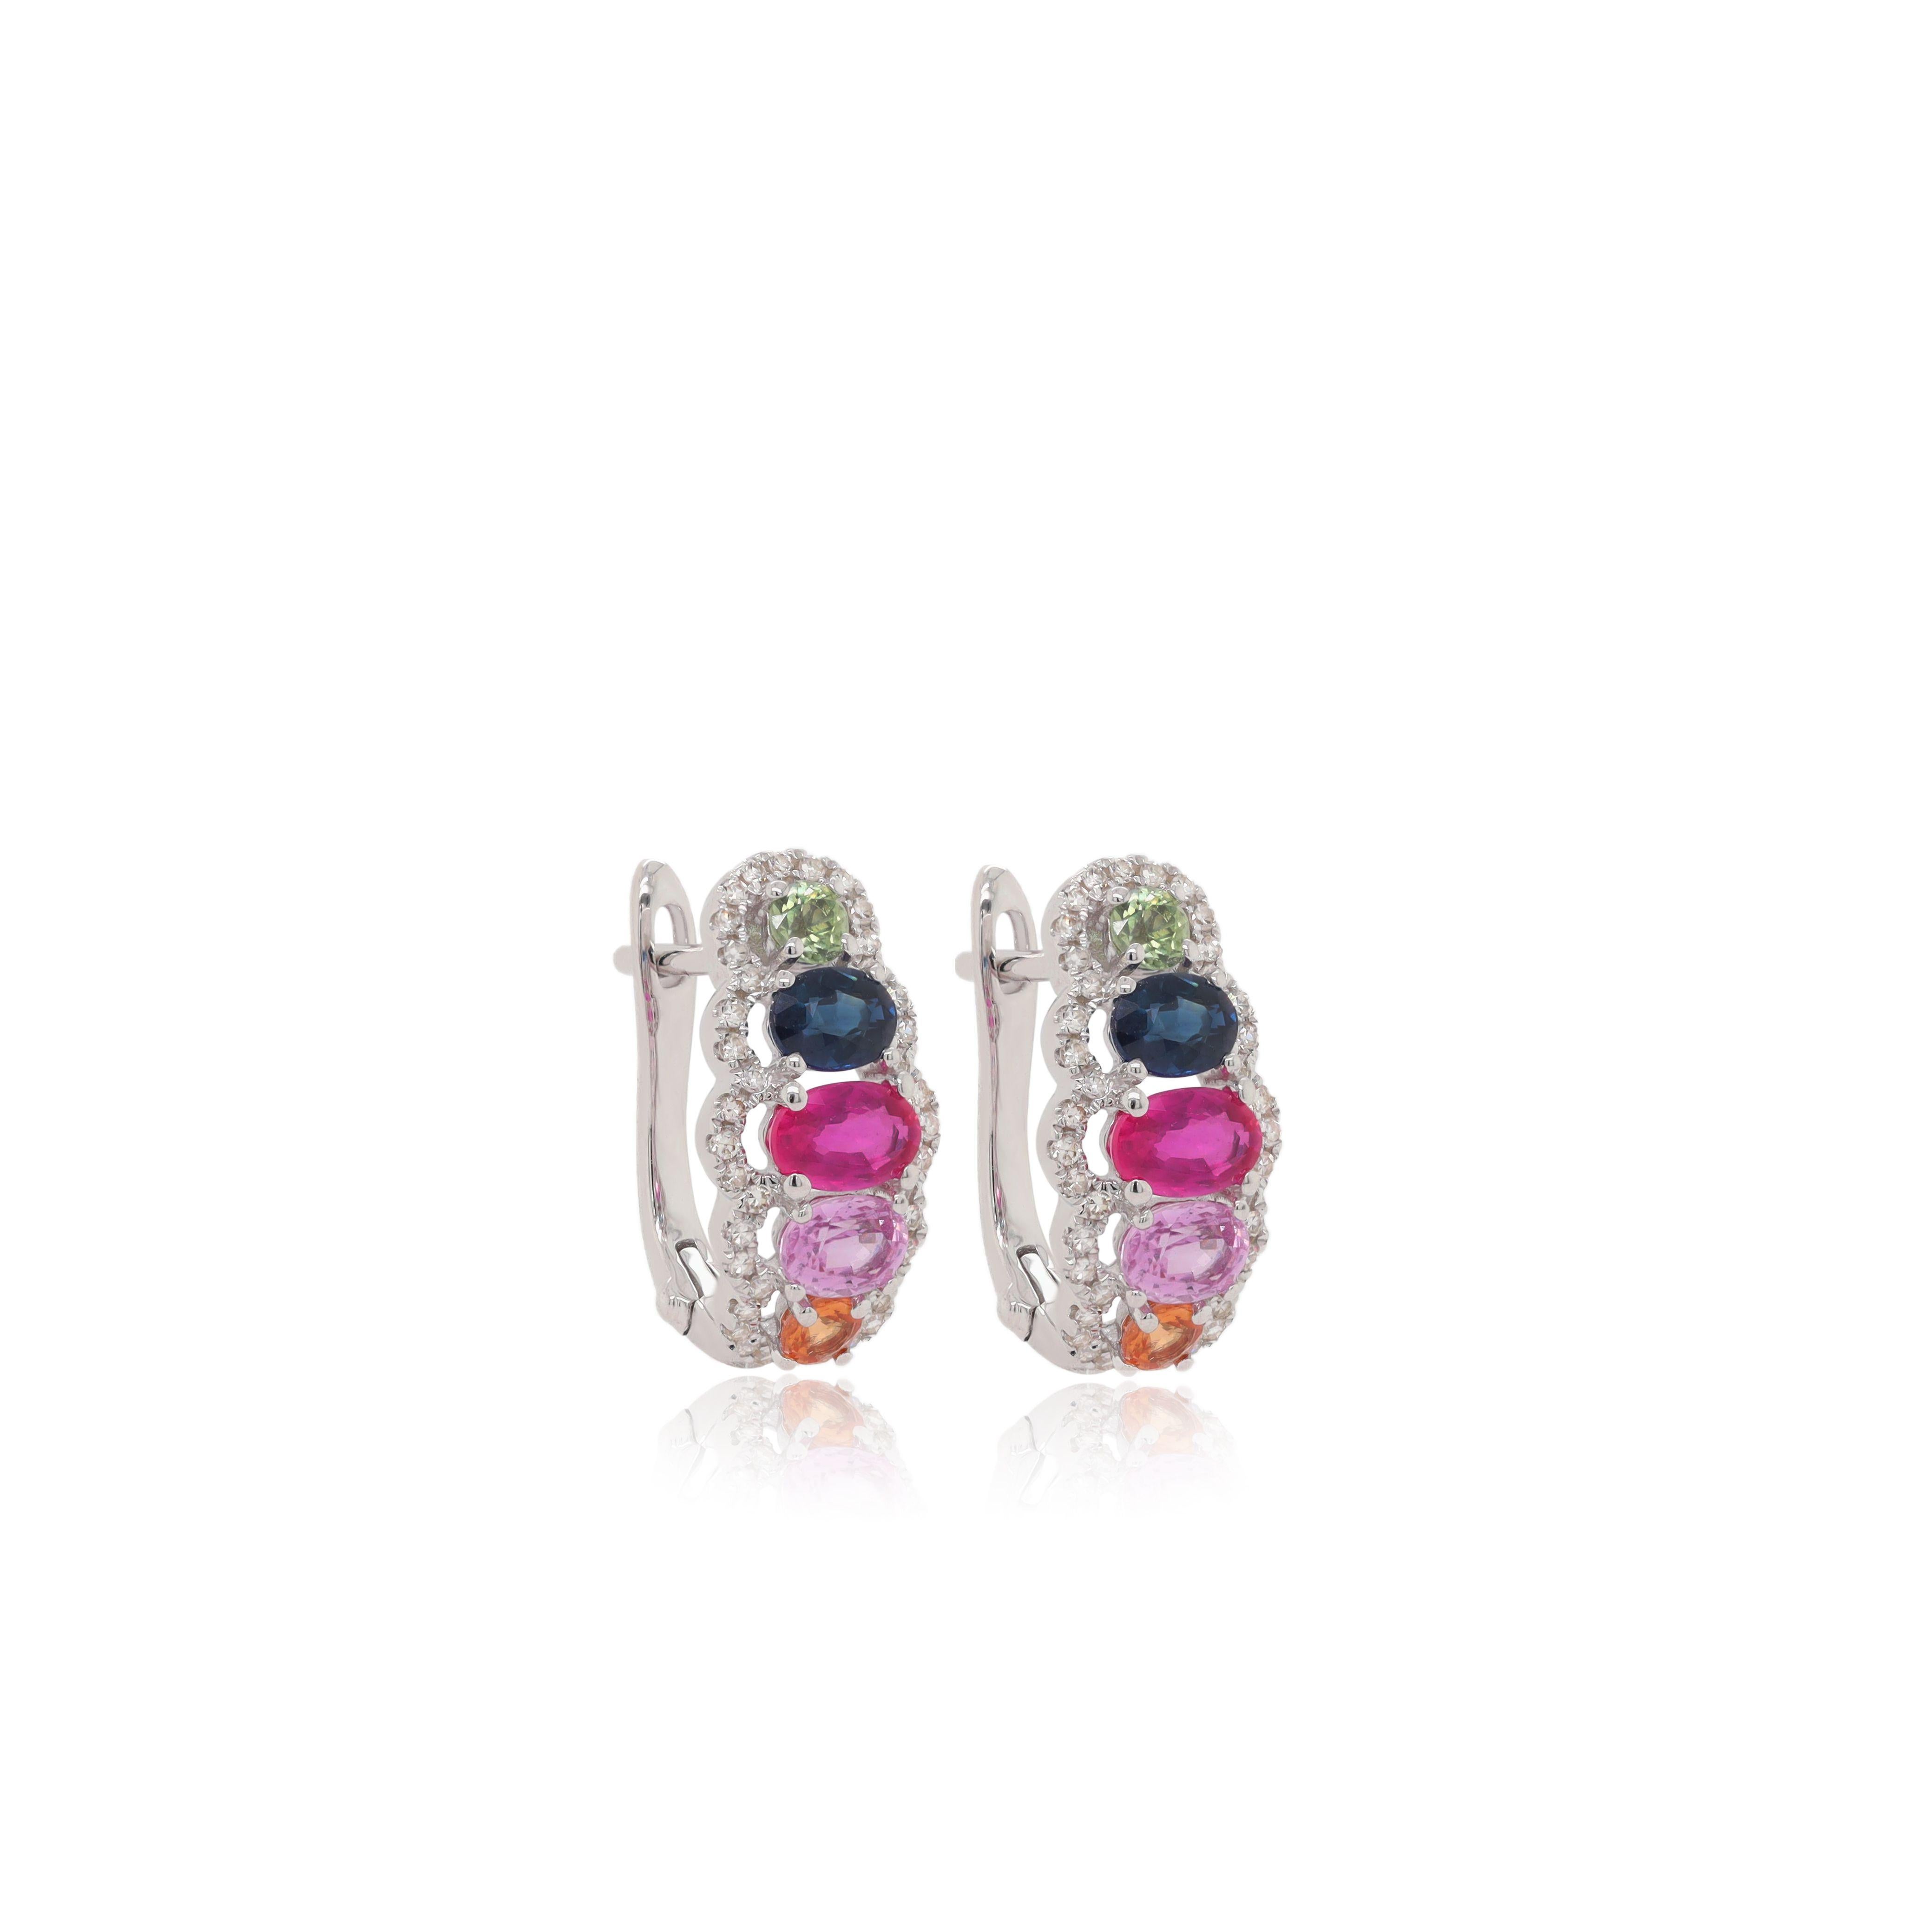 Round Cut 14K White Gold Multicolor Sapphire and Diamond Earrings